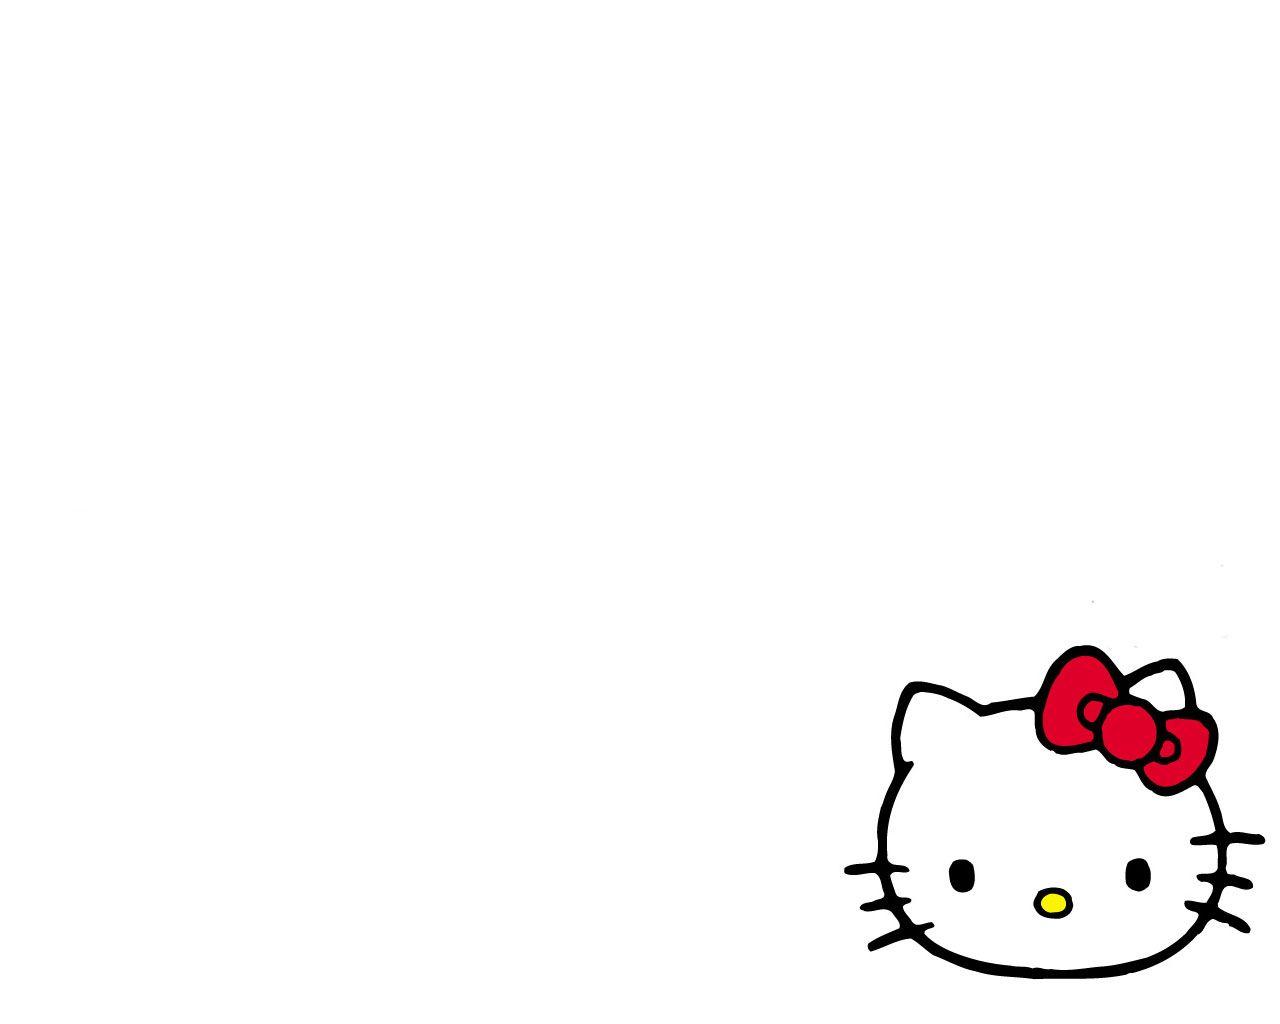 Backgrounds Powerpoint Hello Kitty - Wallpaper Cave